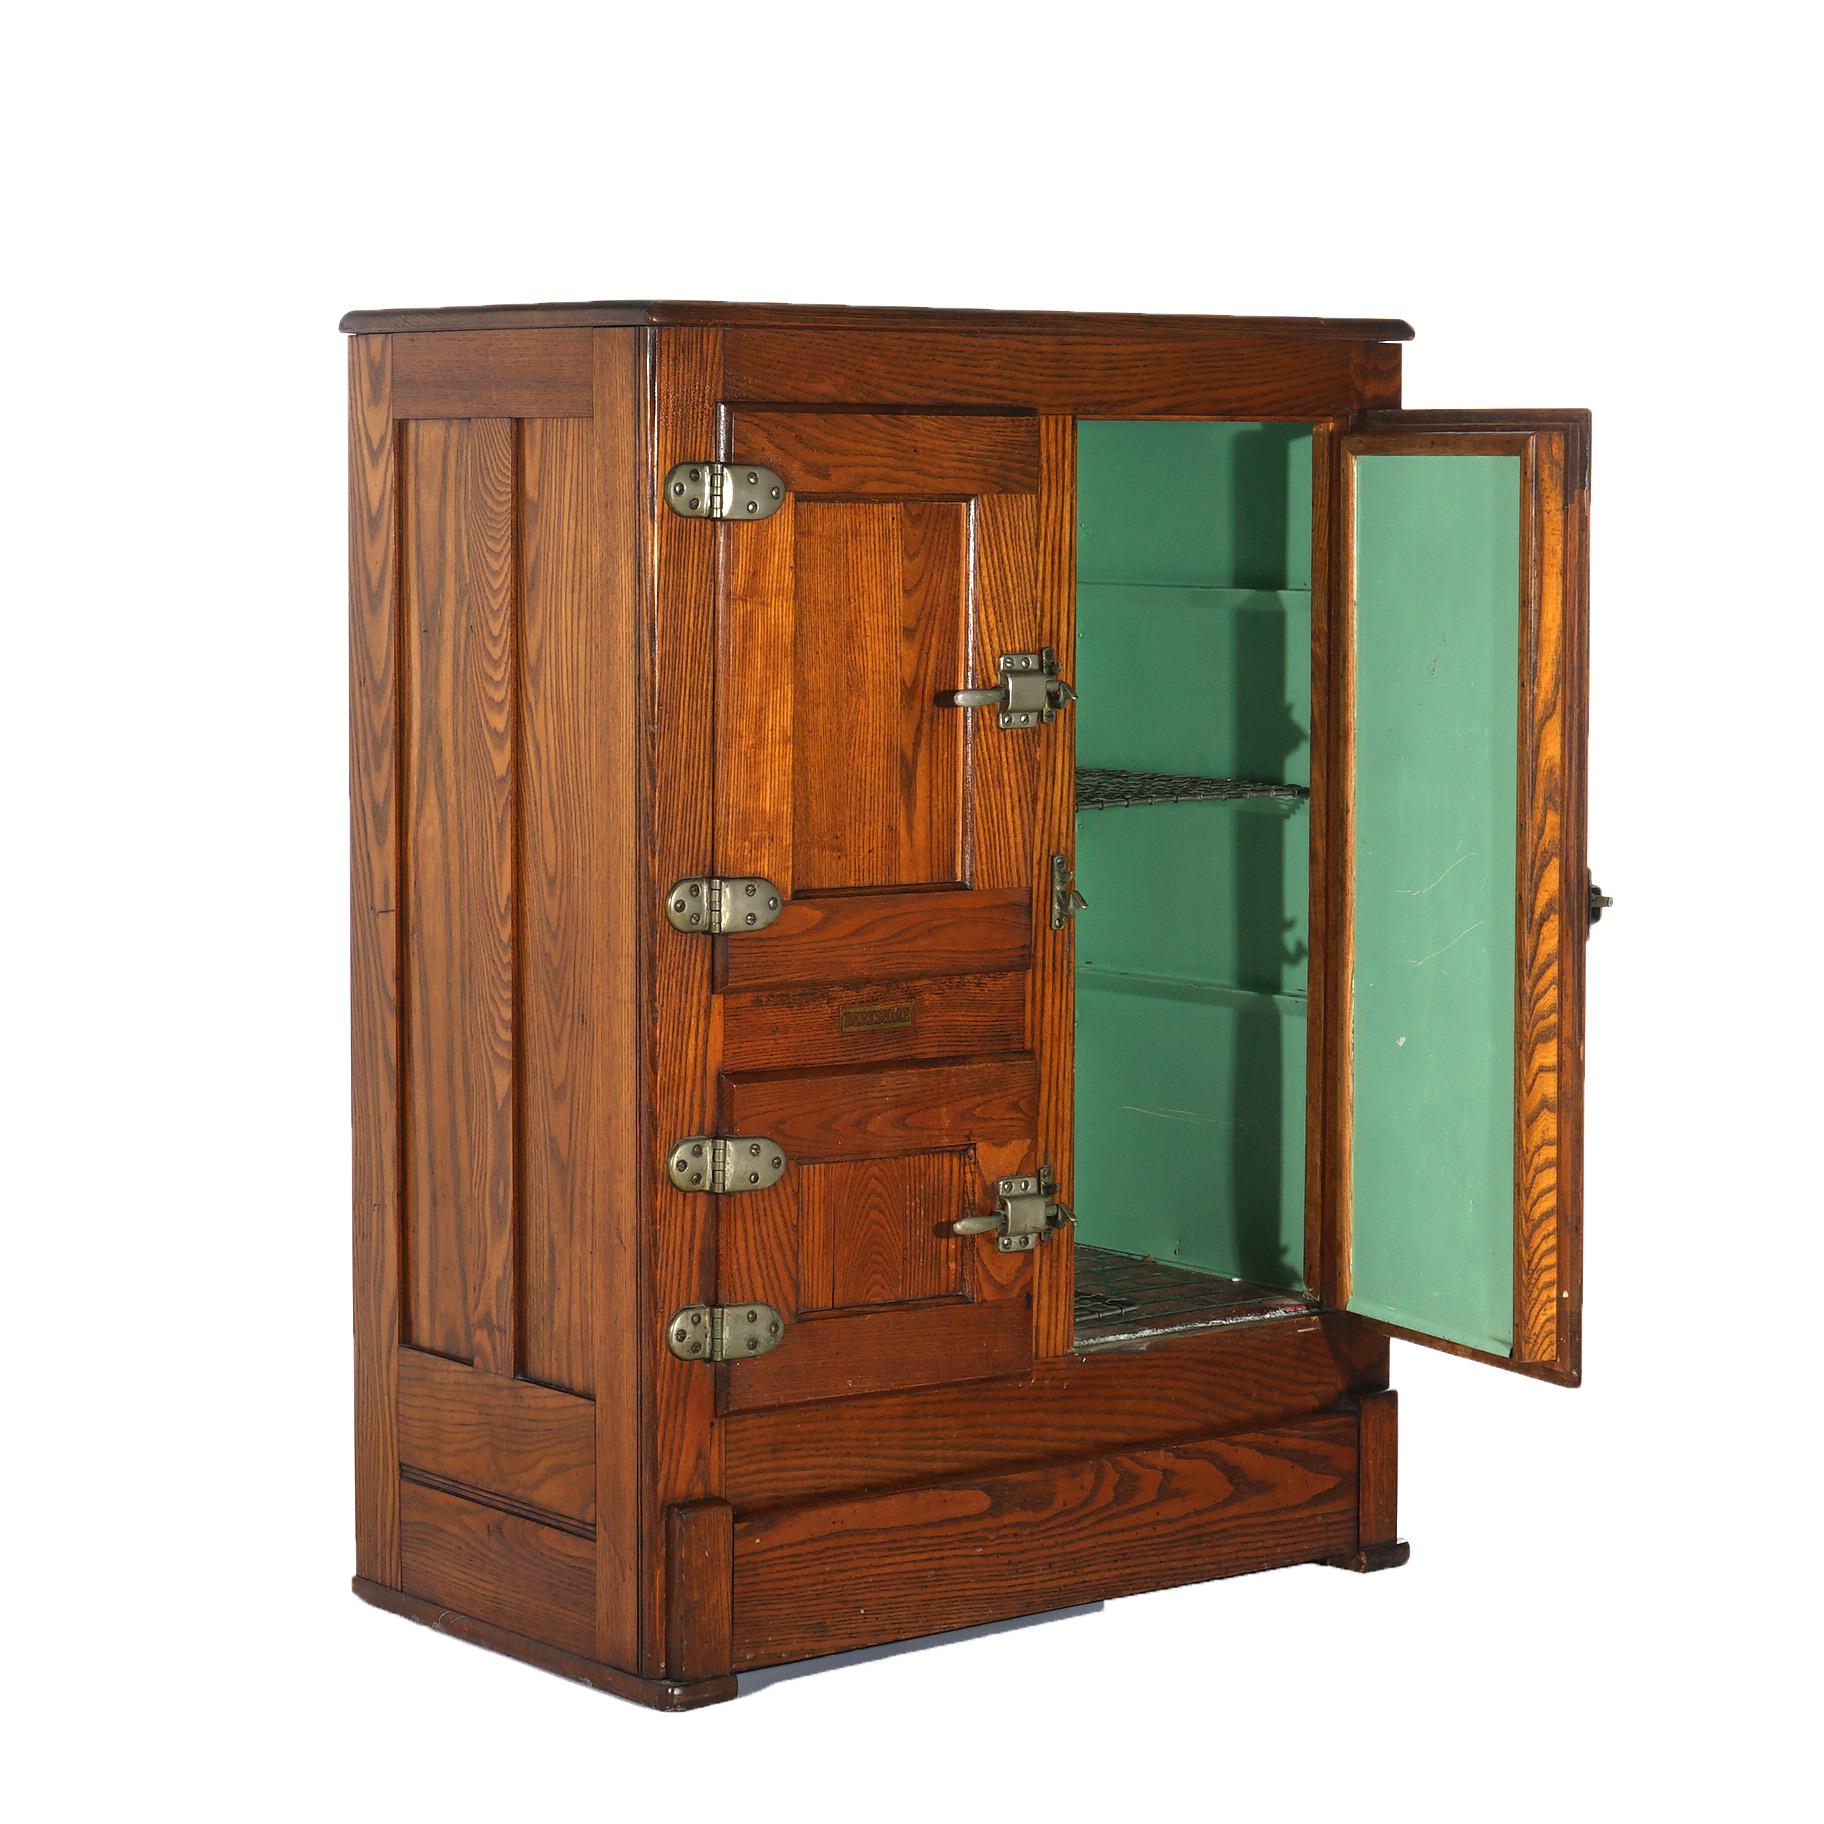 antique wooden ice box manufacturers